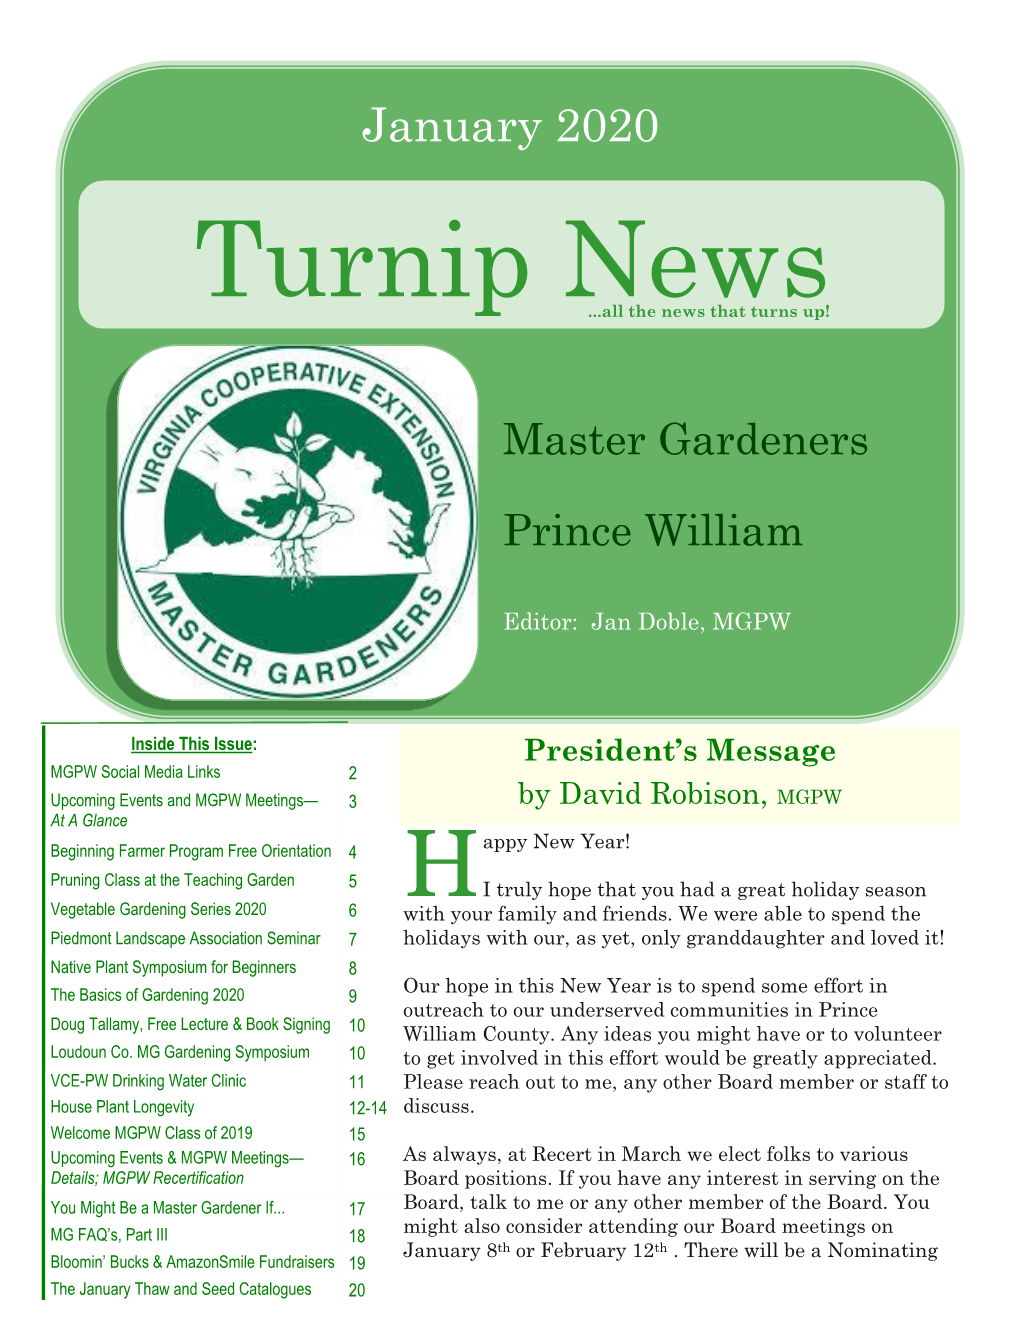 January 2020 Turnip News ...All the News That Turns Up!